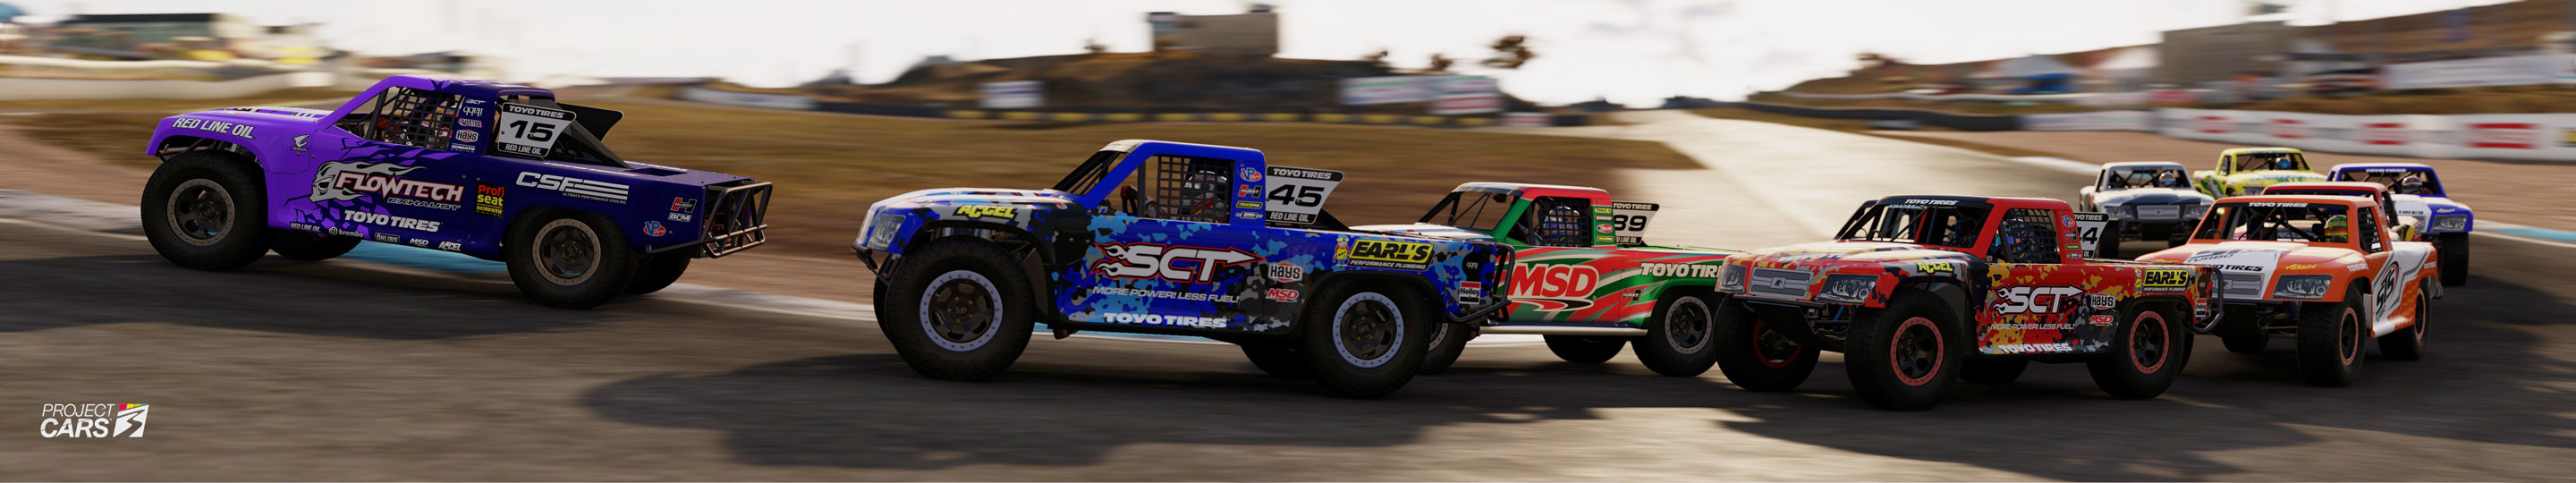 2 PROJECT CARS 3 SUPER TRUCK at KNOCKHILL copy.jpg